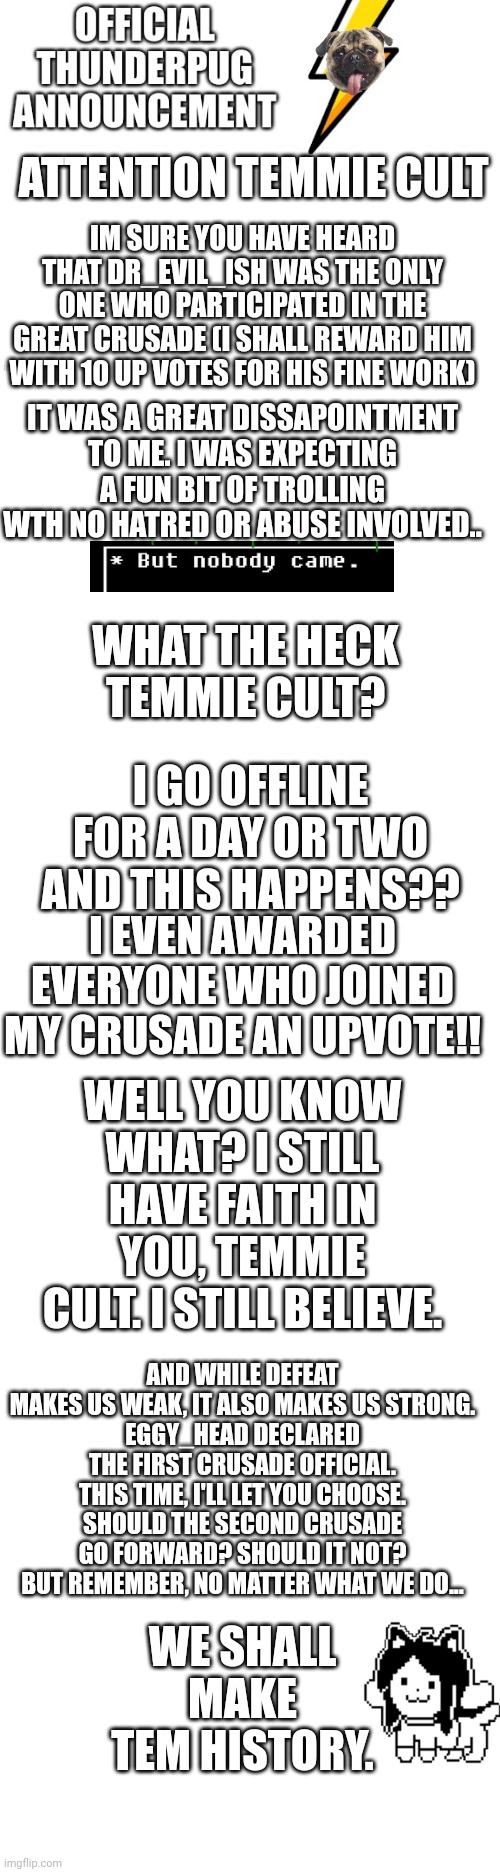 attention temmie cult!! | ATTENTION TEMMIE CULT; IM SURE YOU HAVE HEARD THAT DR_EVIL_ISH WAS THE ONLY ONE WHO PARTICIPATED IN THE GREAT CRUSADE (I SHALL REWARD HIM WITH 10 UP VOTES FOR HIS FINE WORK); IT WAS A GREAT DISSAPOINTMENT TO ME. I WAS EXPECTING A FUN BIT OF TROLLING WTH NO HATRED OR ABUSE INVOLVED.. WHAT THE HECK TEMMIE CULT? I GO OFFLINE FOR A DAY OR TWO AND THIS HAPPENS?? I EVEN AWARDED EVERYONE WHO JOINED MY CRUSADE AN UPVOTE!! WELL YOU KNOW WHAT? I STILL HAVE FAITH IN YOU, TEMMIE CULT. I STILL BELIEVE. AND WHILE DEFEAT MAKES US WEAK, IT ALSO MAKES US STRONG.
EGGY_HEAD DECLARED THE FIRST CRUSADE OFFICIAL. THIS TIME, I'LL LET YOU CHOOSE. SHOULD THE SECOND CRUSADE GO FORWARD? SHOULD IT NOT? BUT REMEMBER, NO MATTER WHAT WE DO... WE SHALL MAKE TEM HISTORY. | image tagged in official thunderpug announcement template,blank white template | made w/ Imgflip meme maker